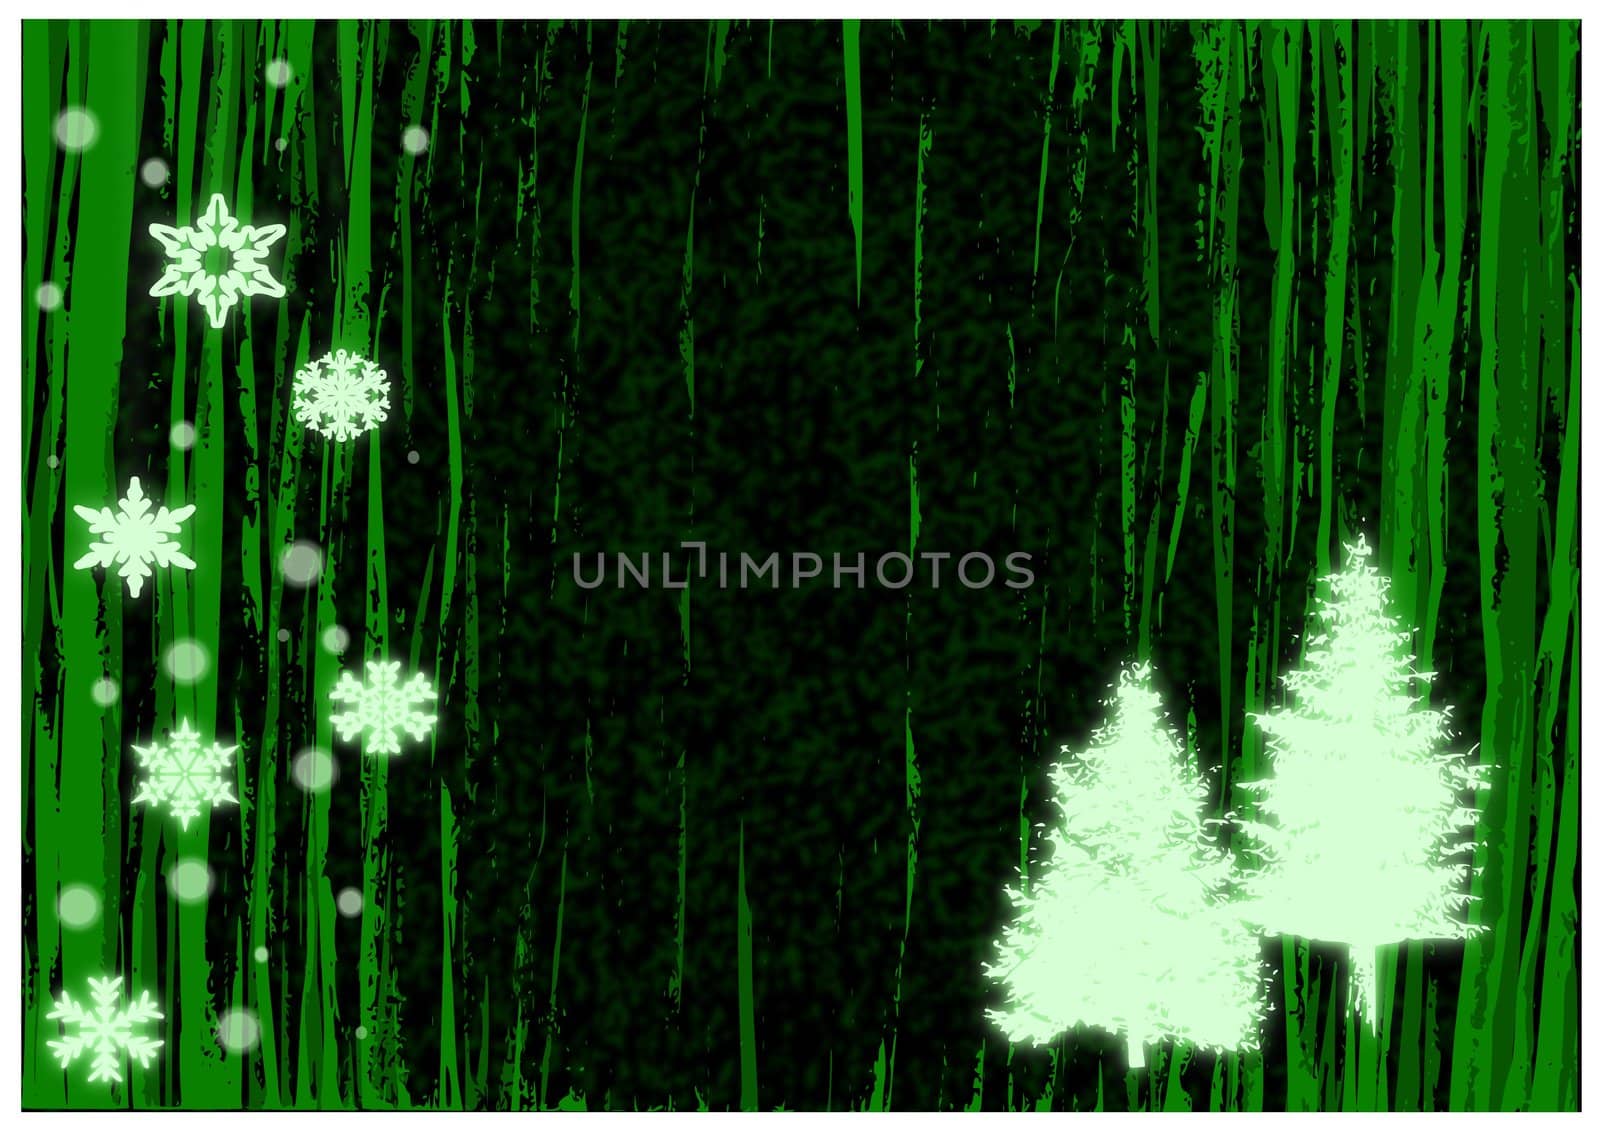 Christmas illustration of glowing green snowflakes and trees.